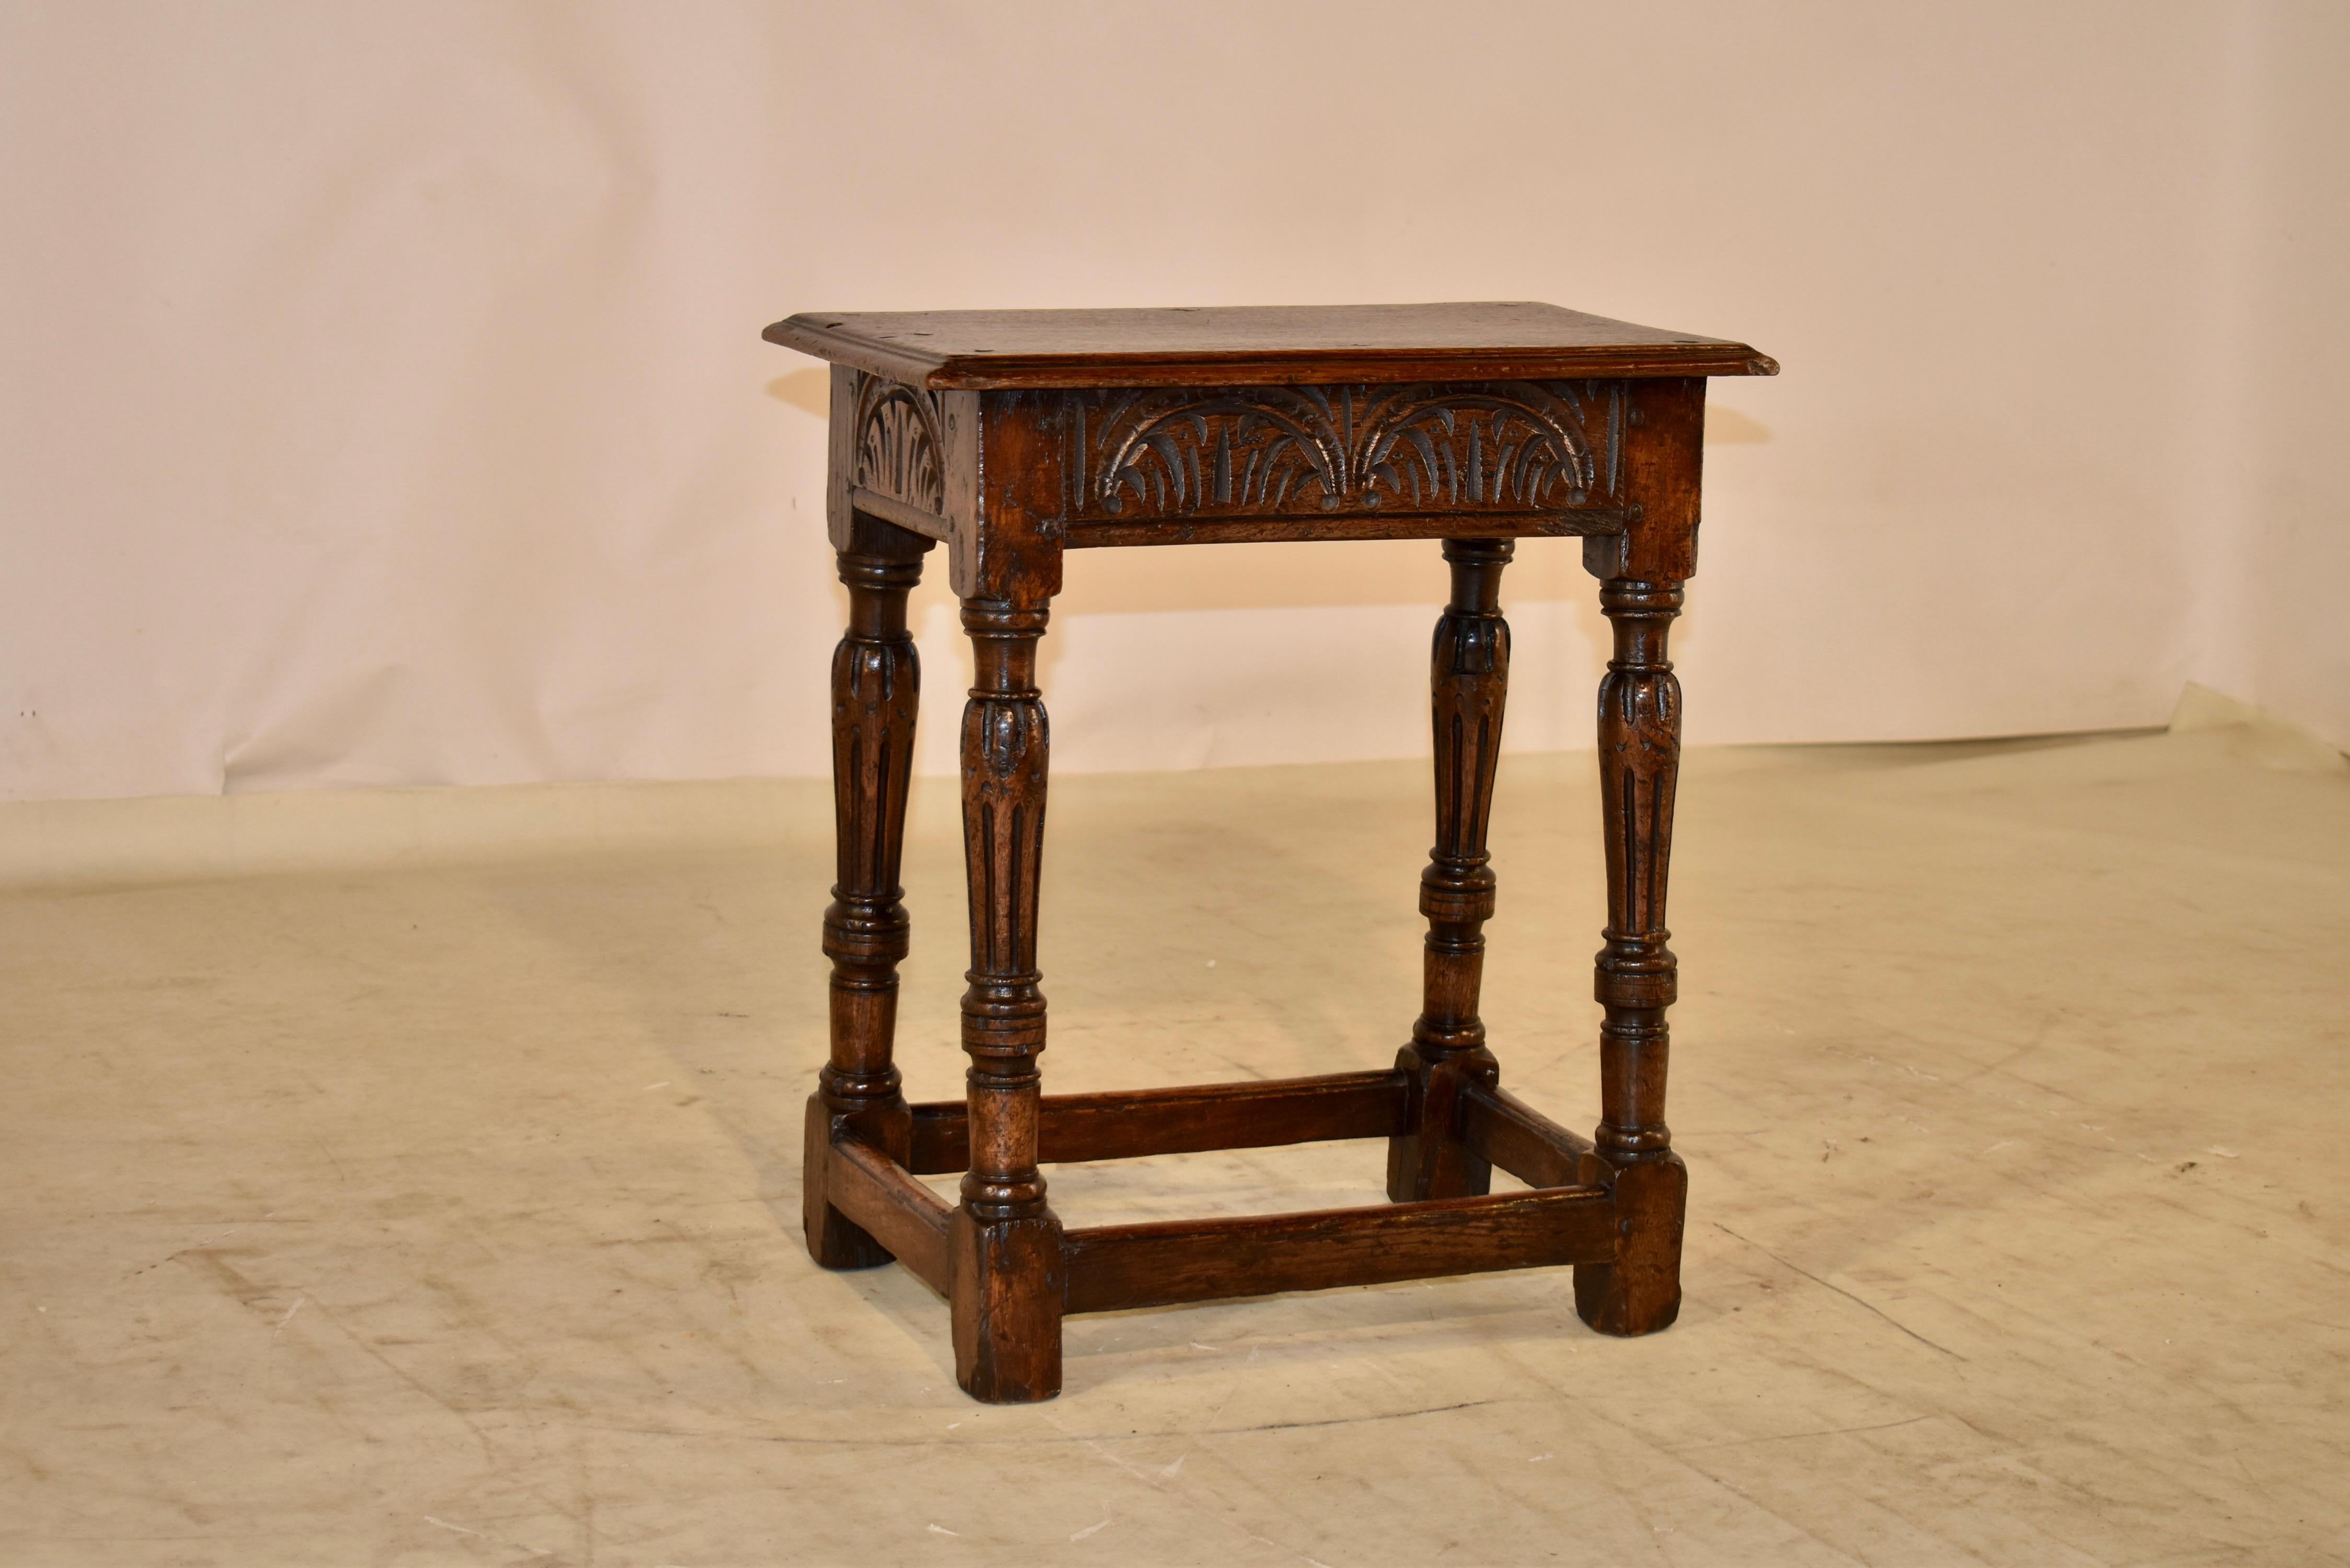 18th century oak joint stool from England. The top has a beveled edge and has pegged construction. The top follows down to a hand carved apron, over splayed and hand turned and carved legs, joined by simple stretchers. This piece has extraordinary